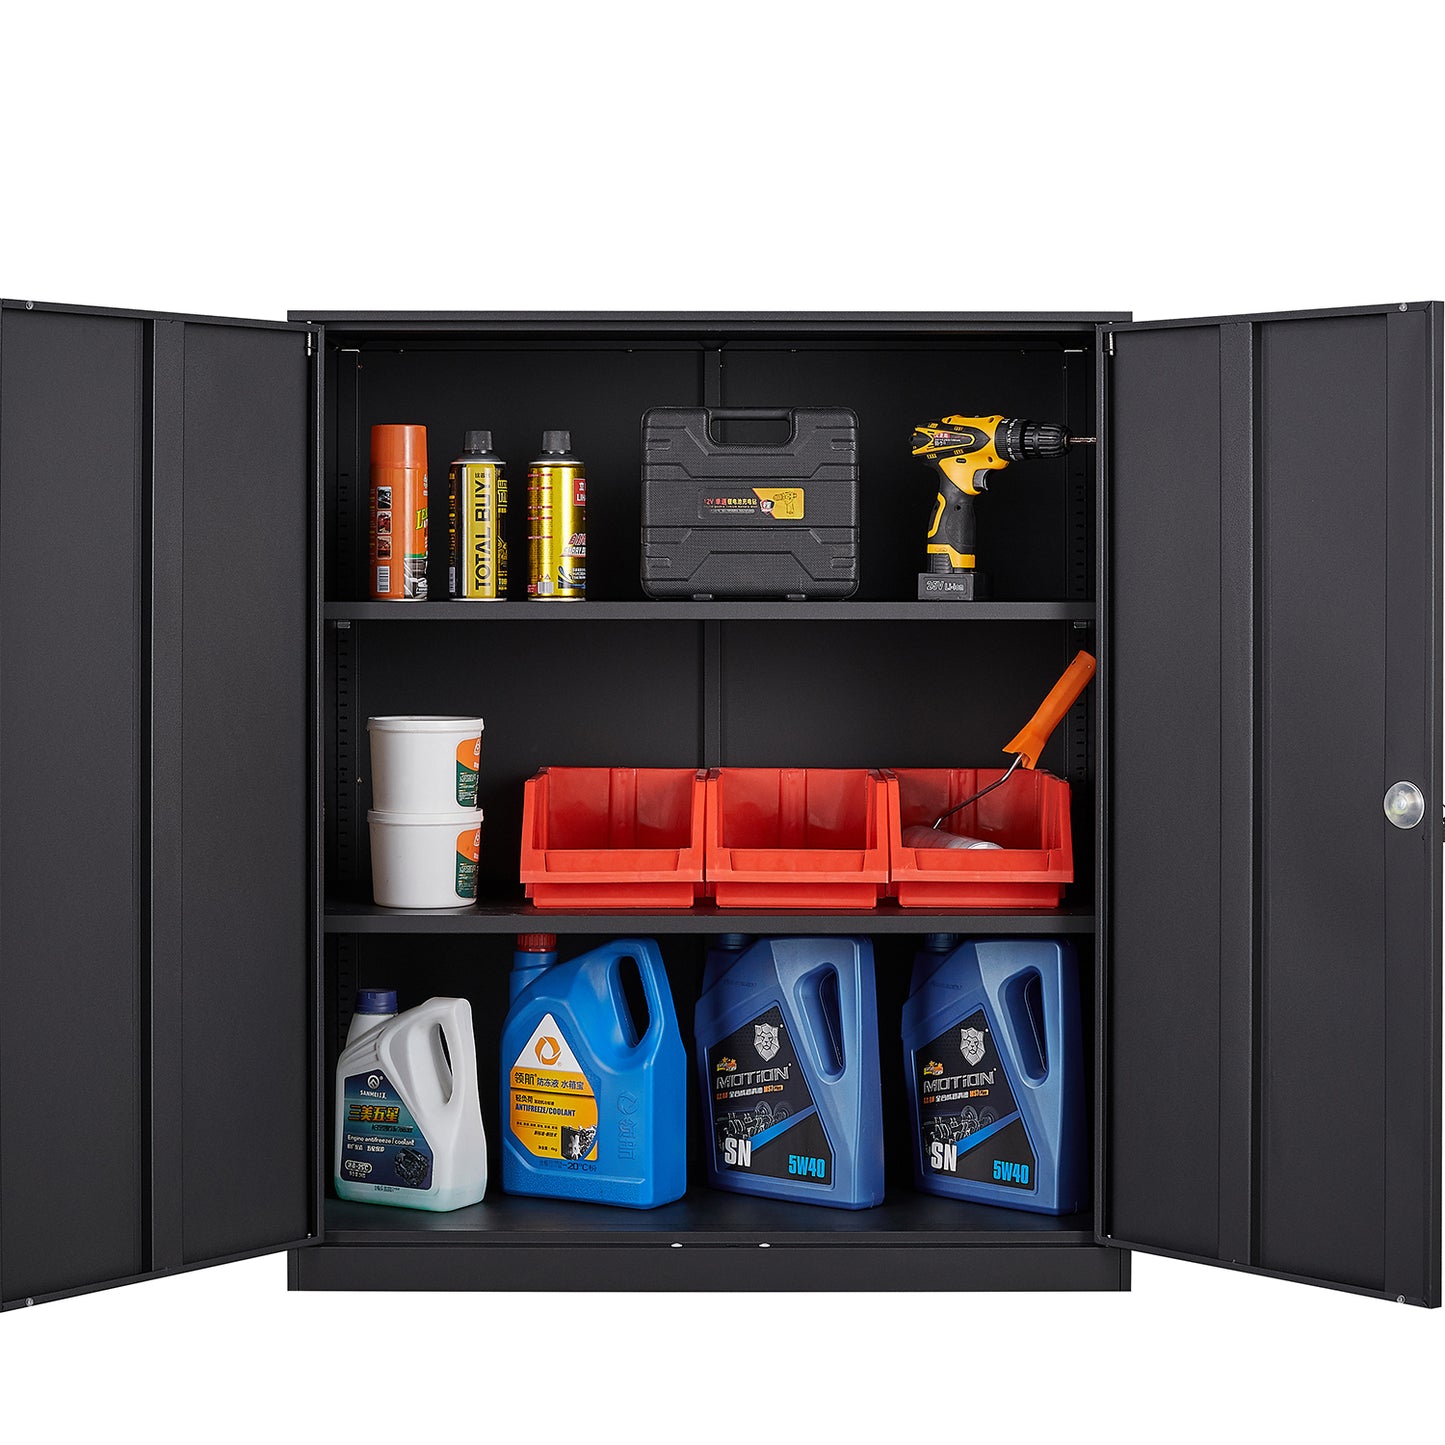 METAL STORAGE CABINET WITH 2 LAYERS ADJUSTABLE SHELVES ,ASSEMBLE REQUIRE